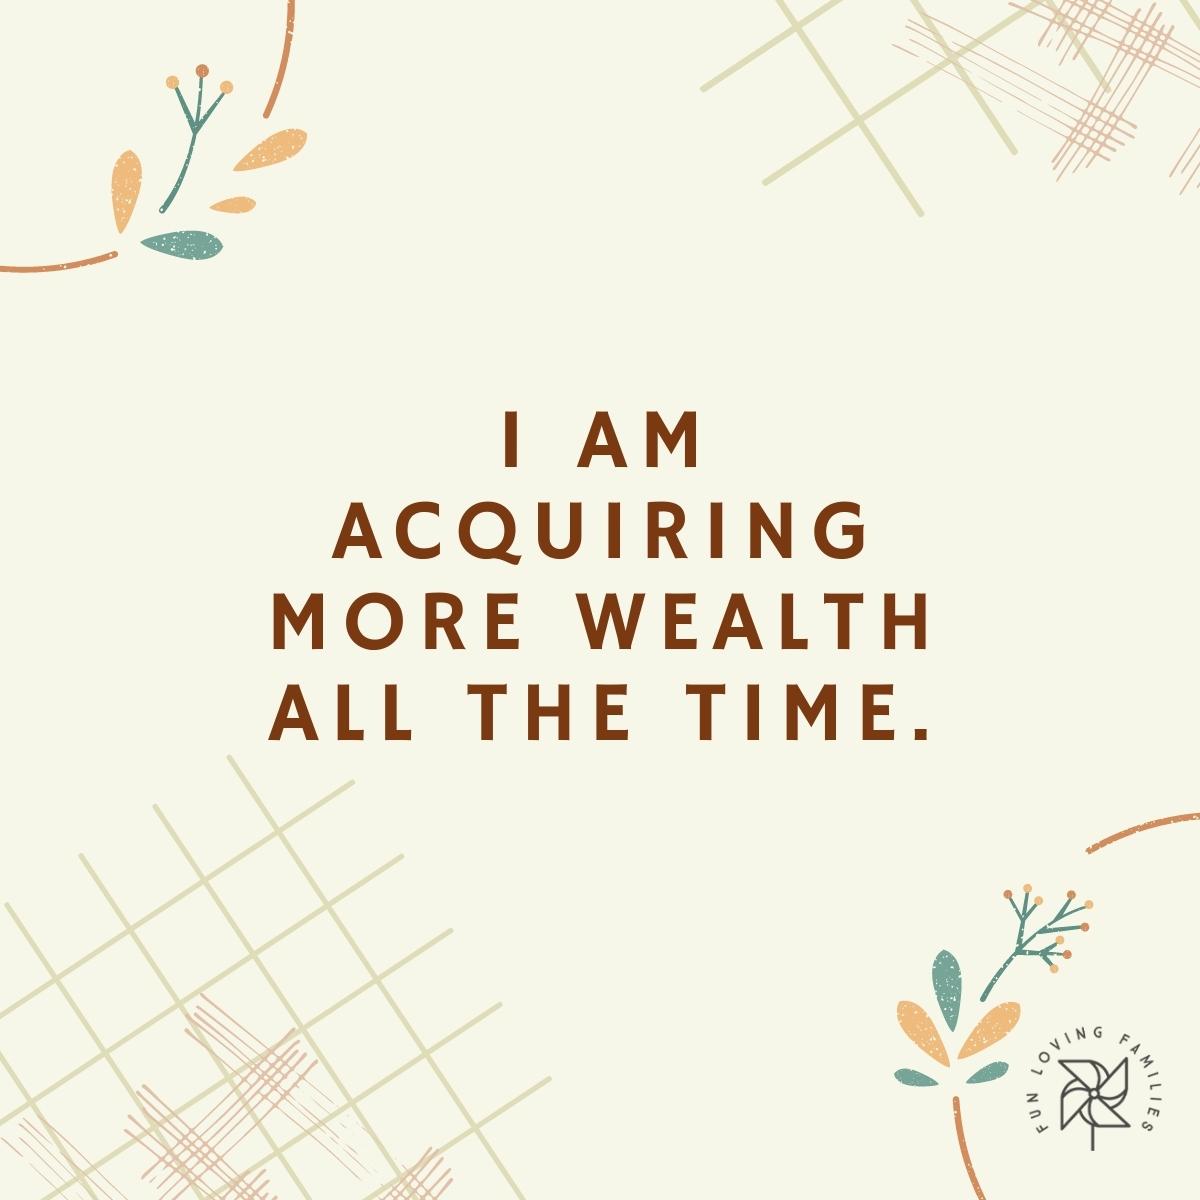 I am acquiring more wealth all the time affirmation